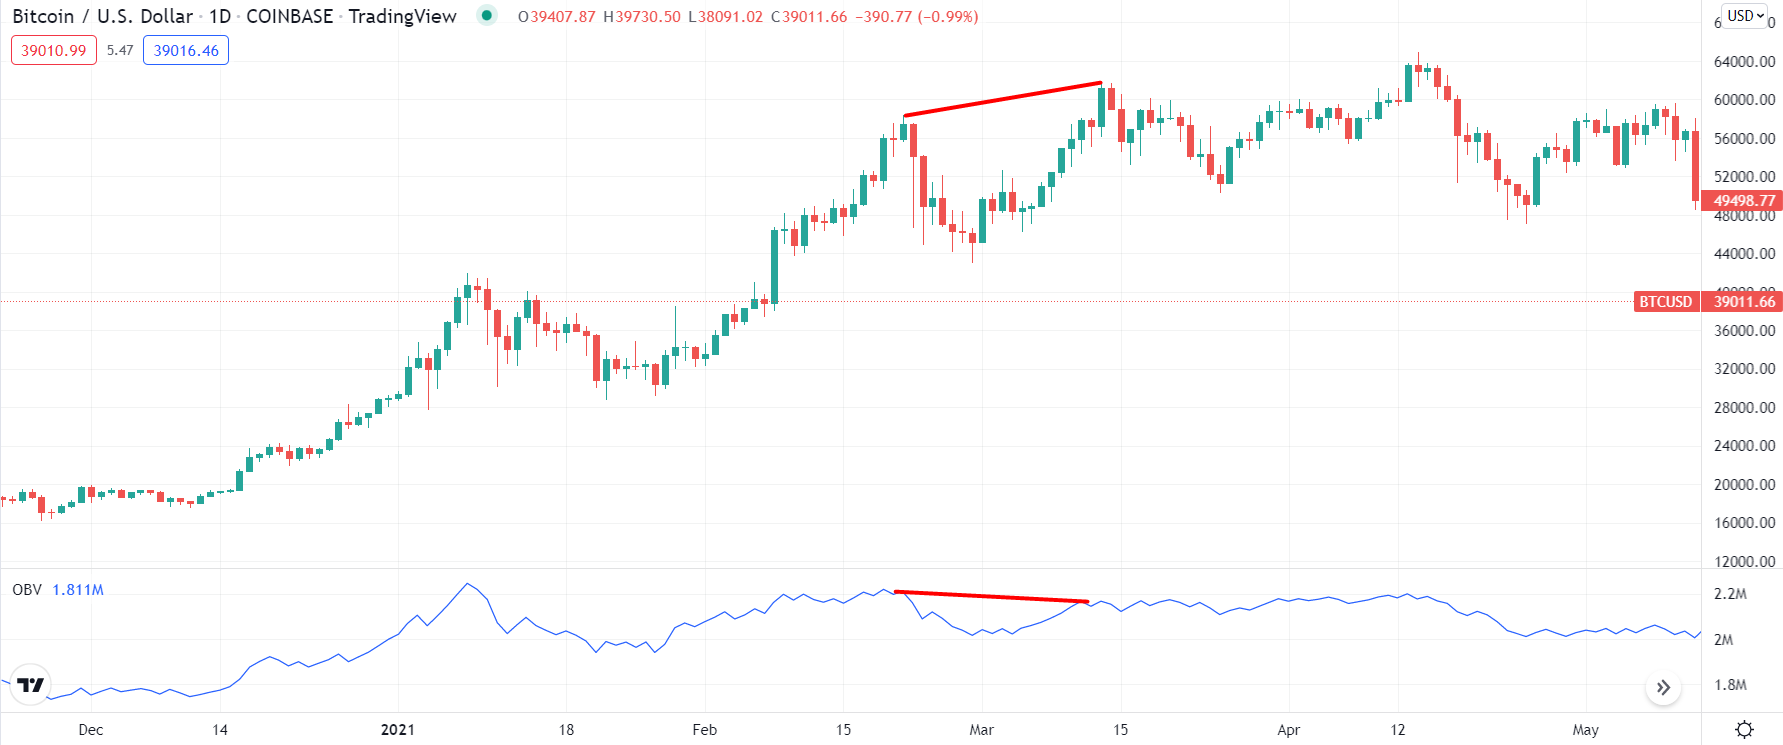 OBV indicator divergence on a chart